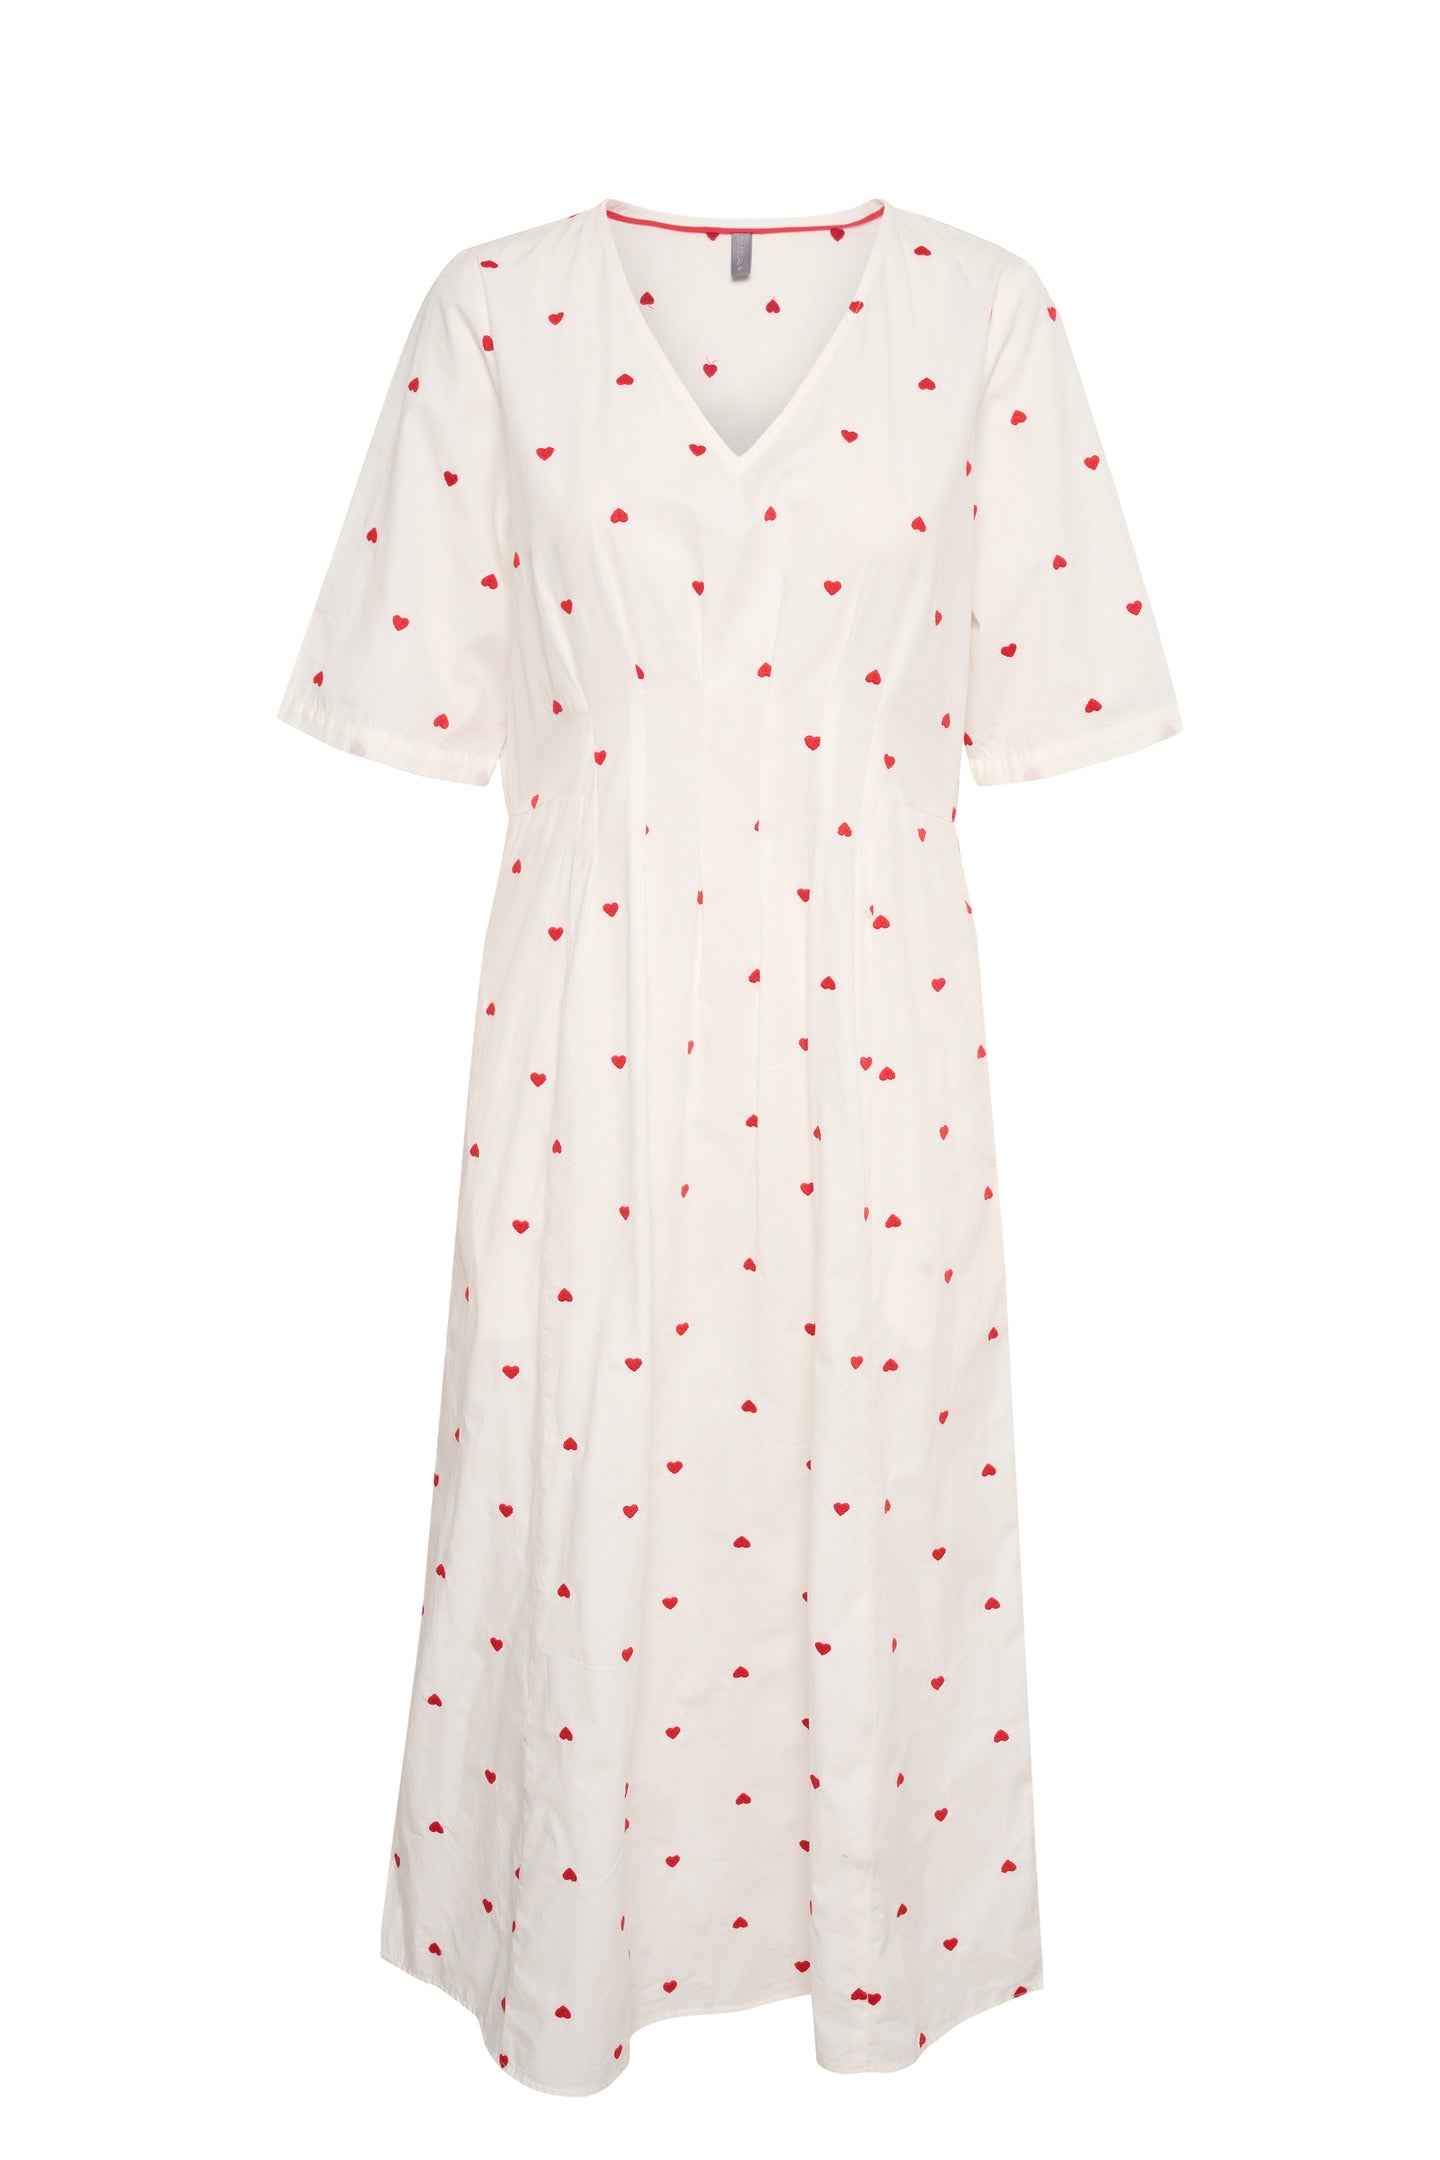 Culture Homa Dress, White/Red